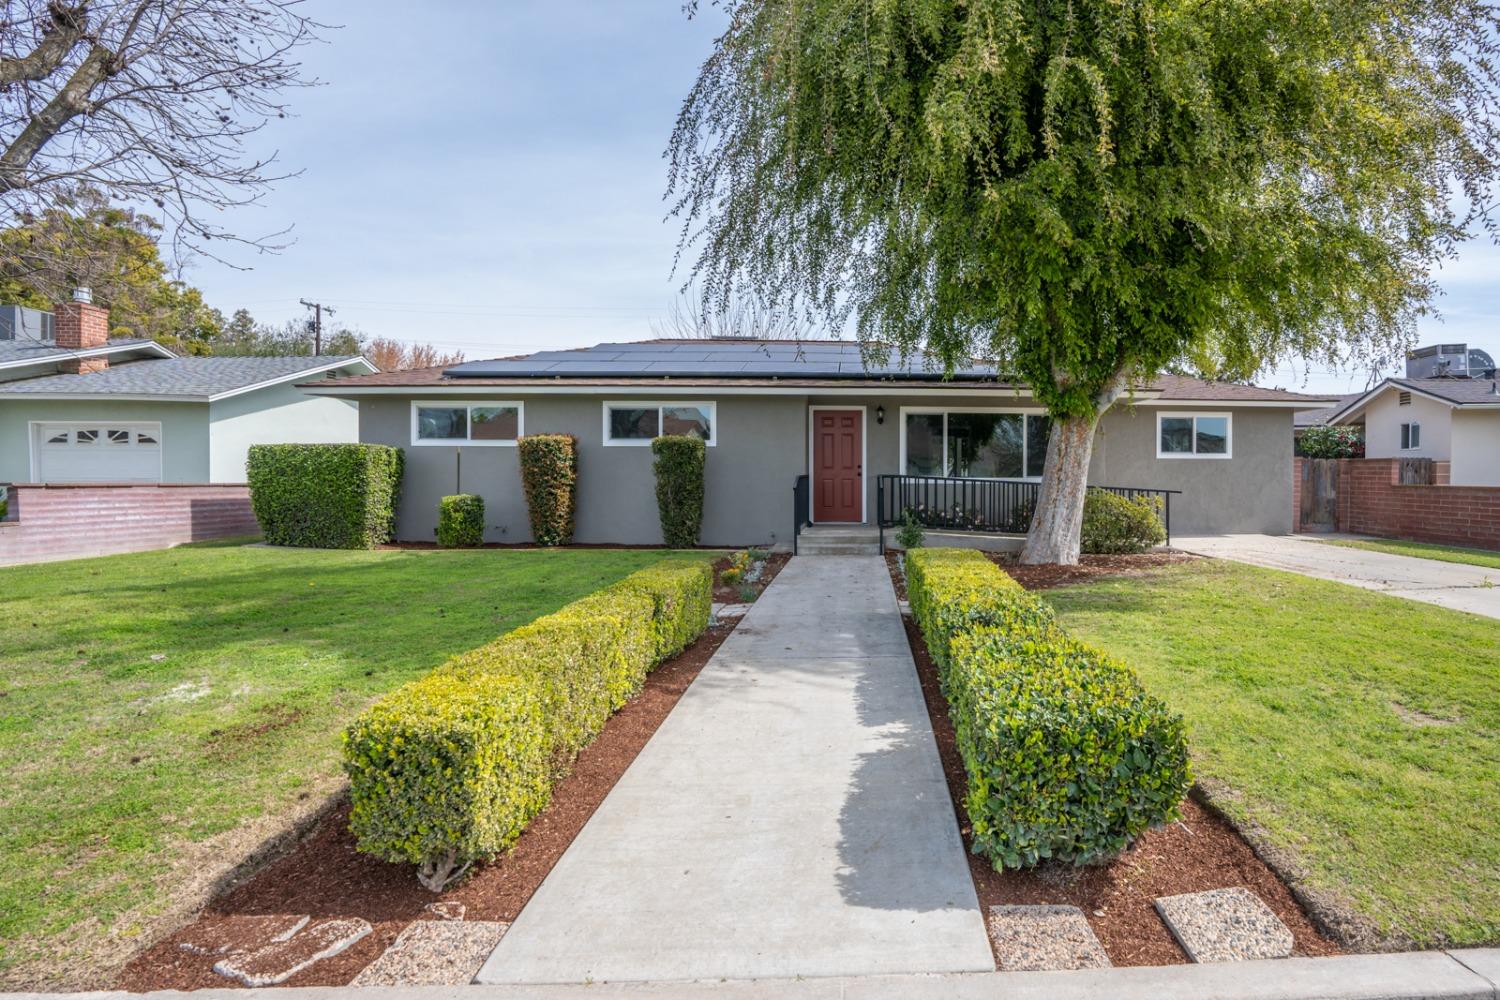 Photo of 2516 17th Ave in Kingsburg, CA